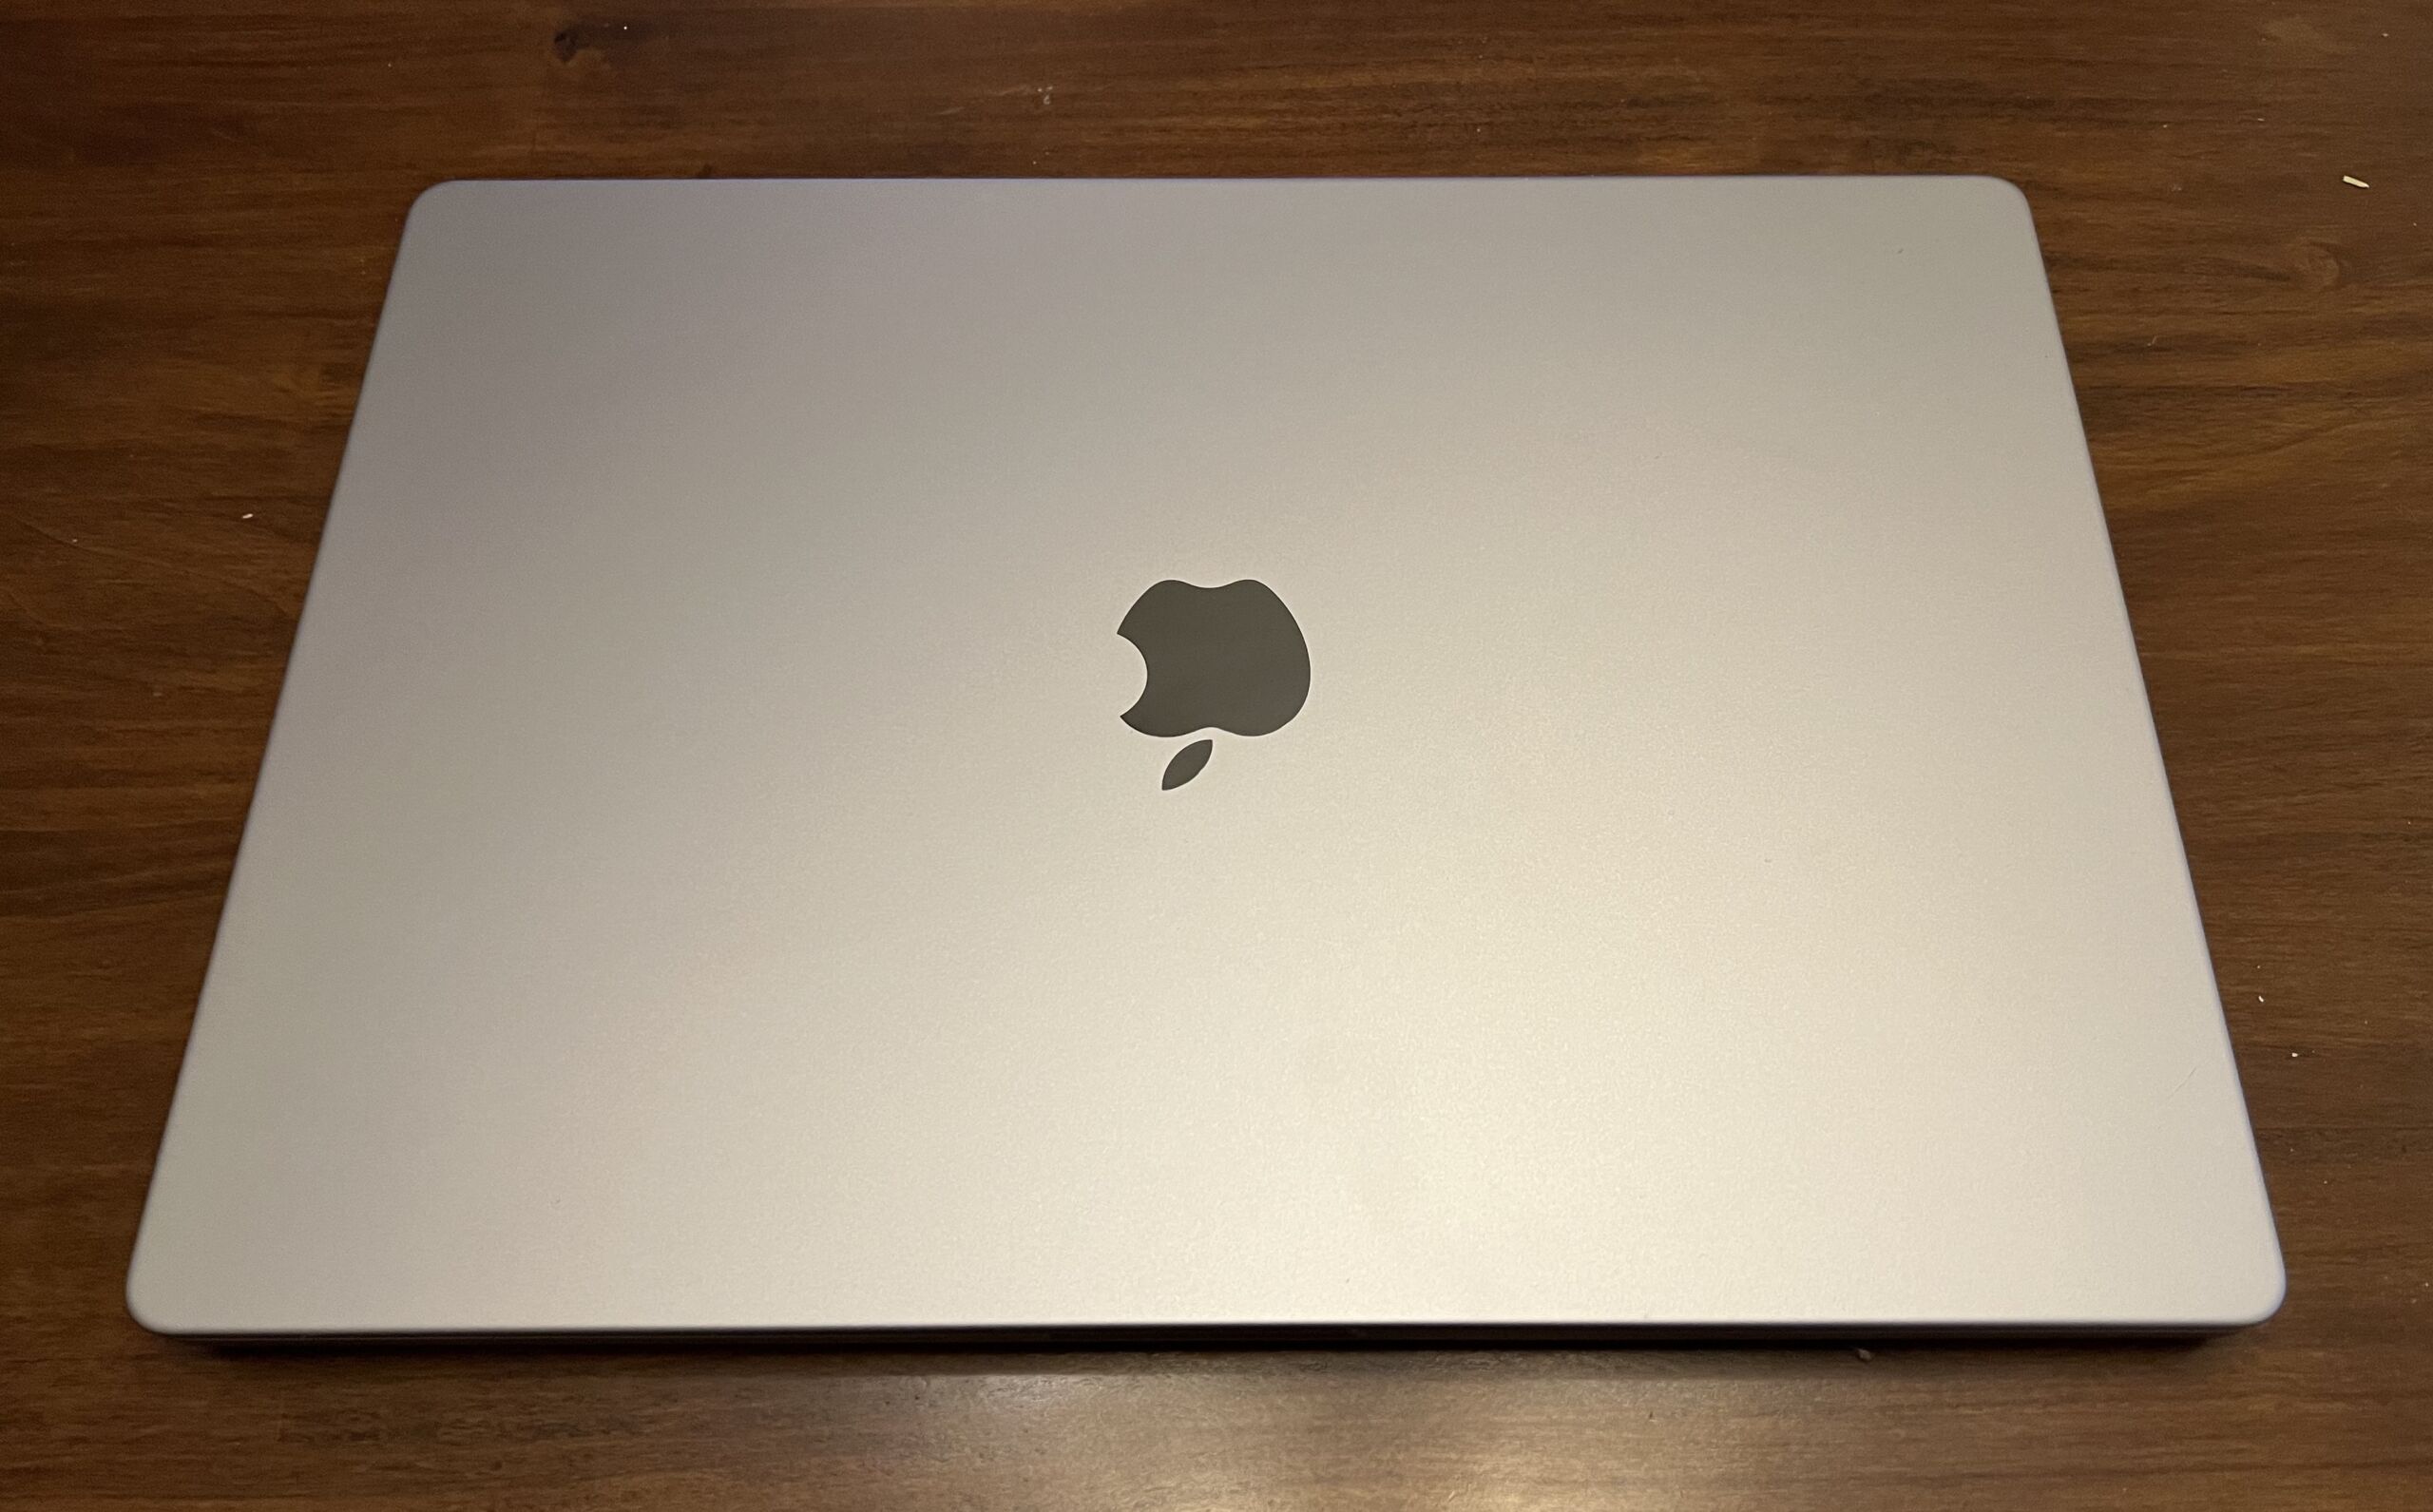 2023 MacBook Pro review: A refined second generation | Ars